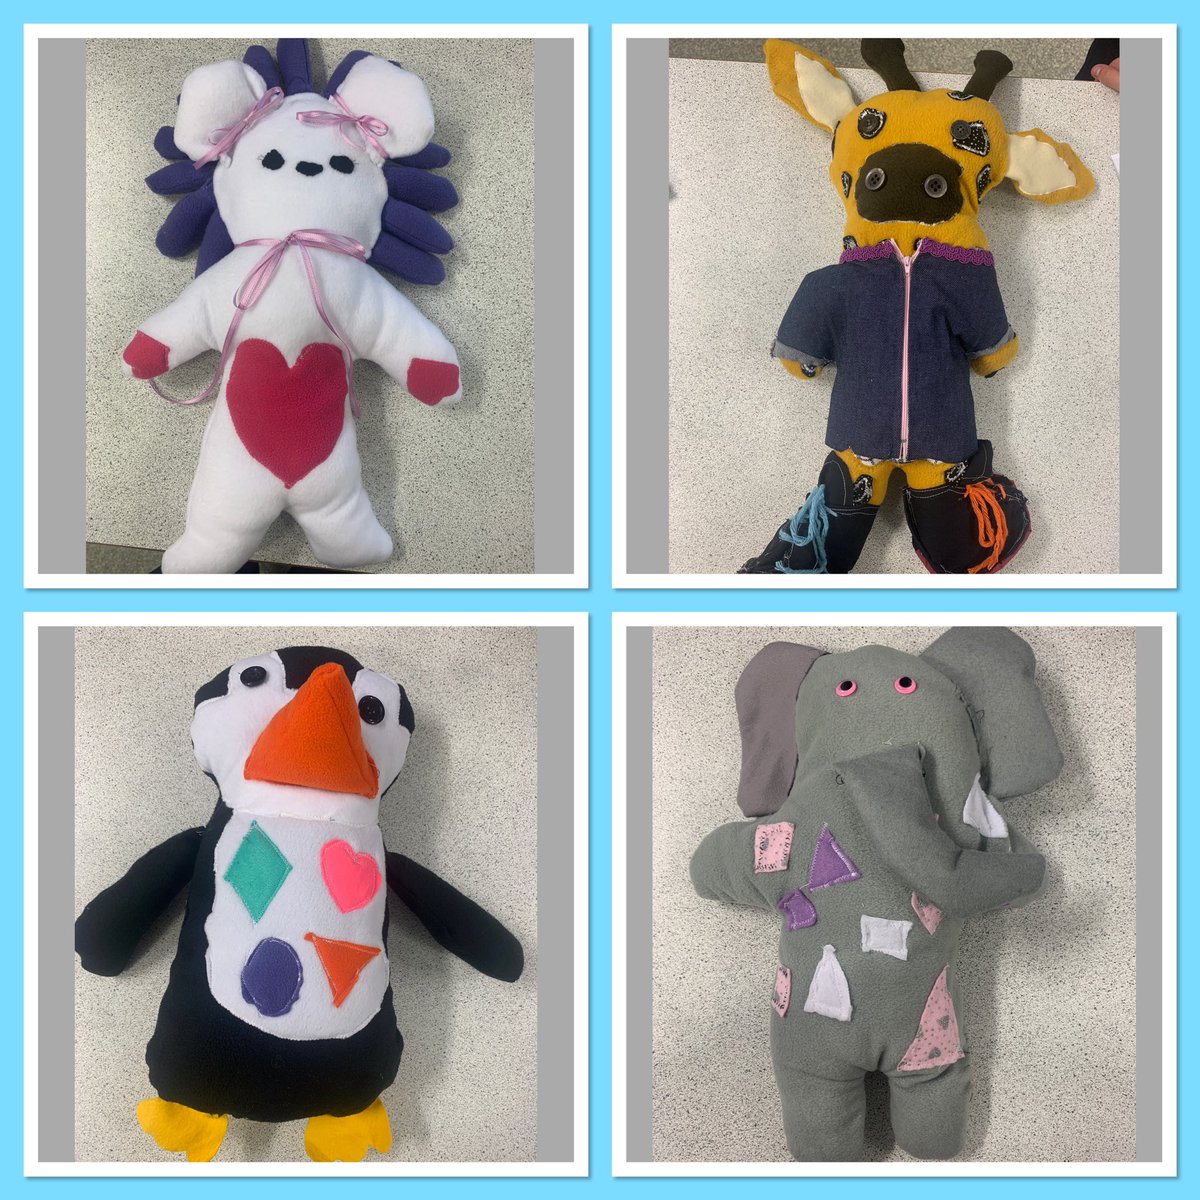 A few examples of the creative educational toys designed and manufactured by Y8’s on their final DT rotation…I am looking forward to seeing the rest completed next week @PGSALC ⭐️👏🏻 #aimhigh #beproud